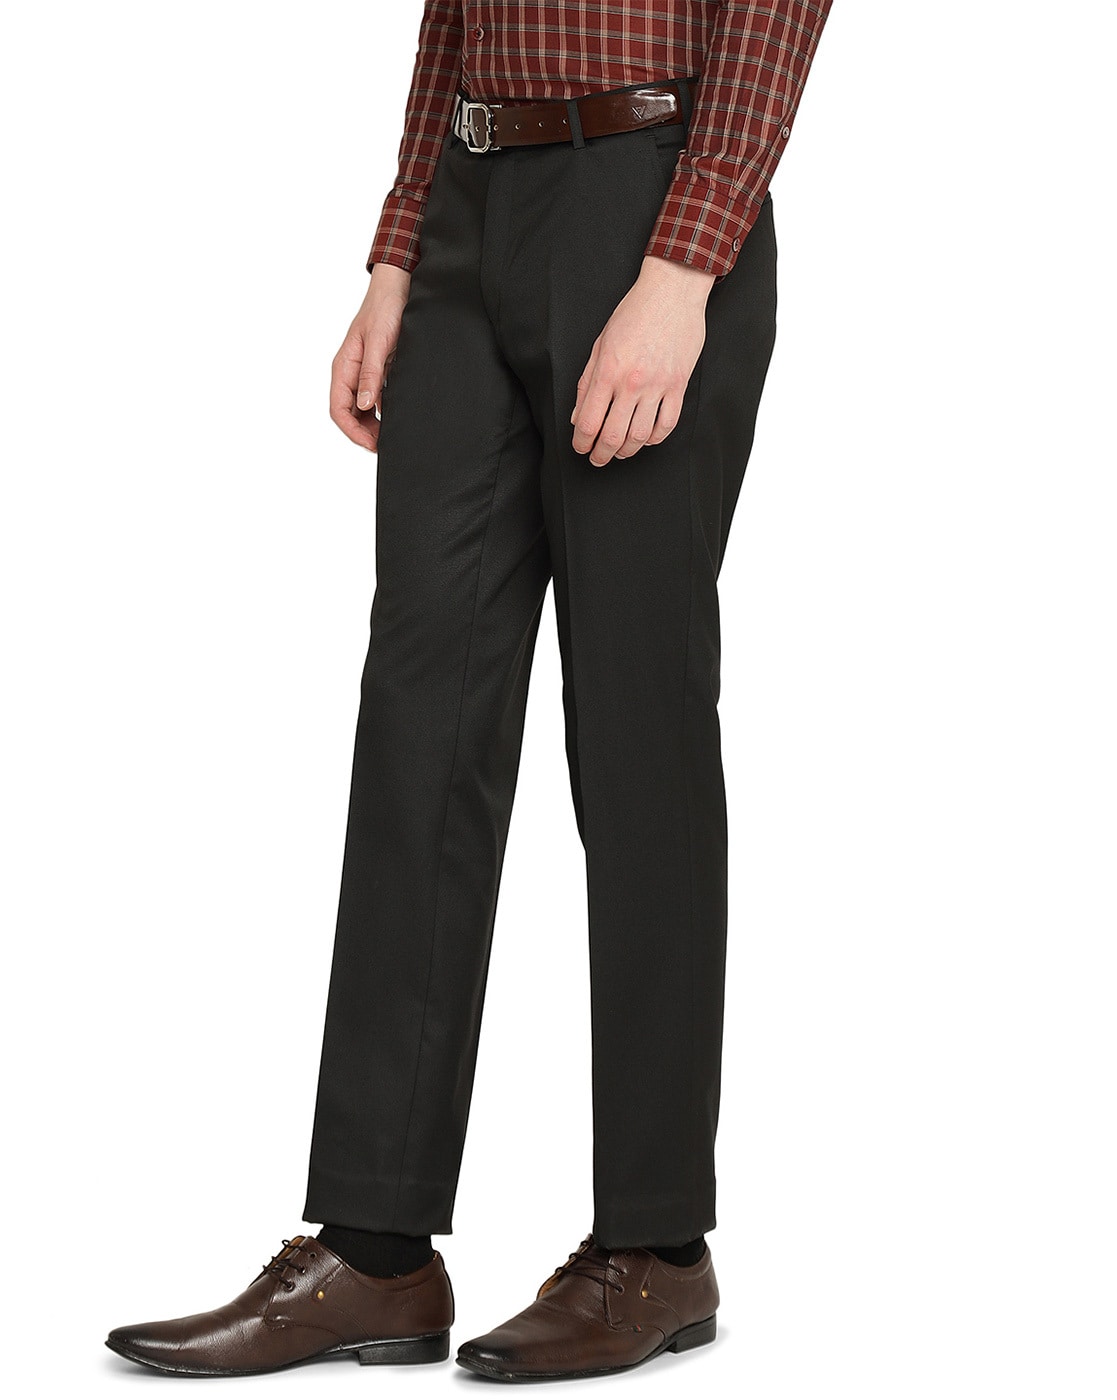 Buy Latest Black Pleated Pants Mens Online In India